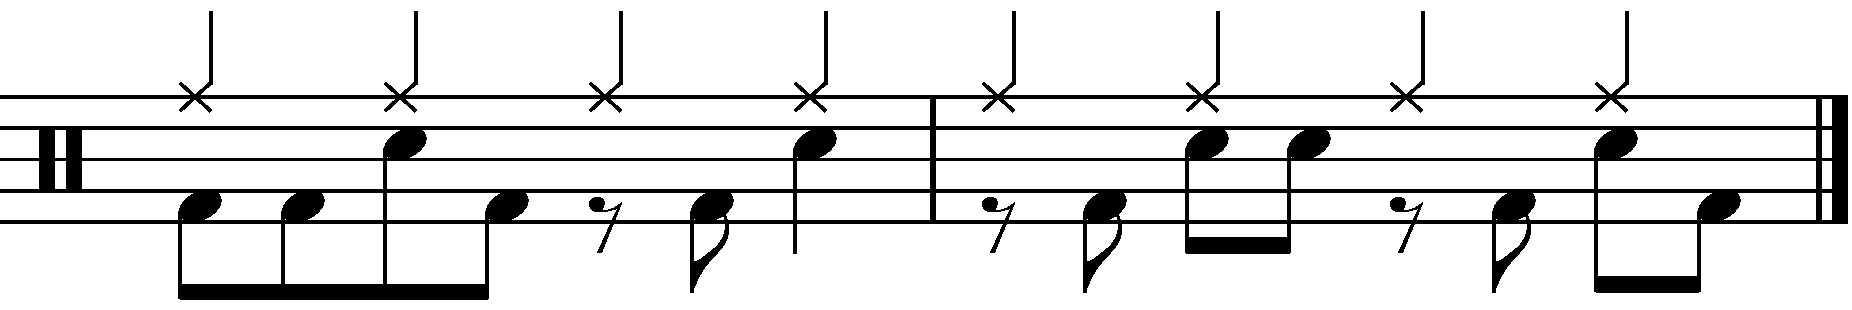 Additional 2 Bar Grooves - 2